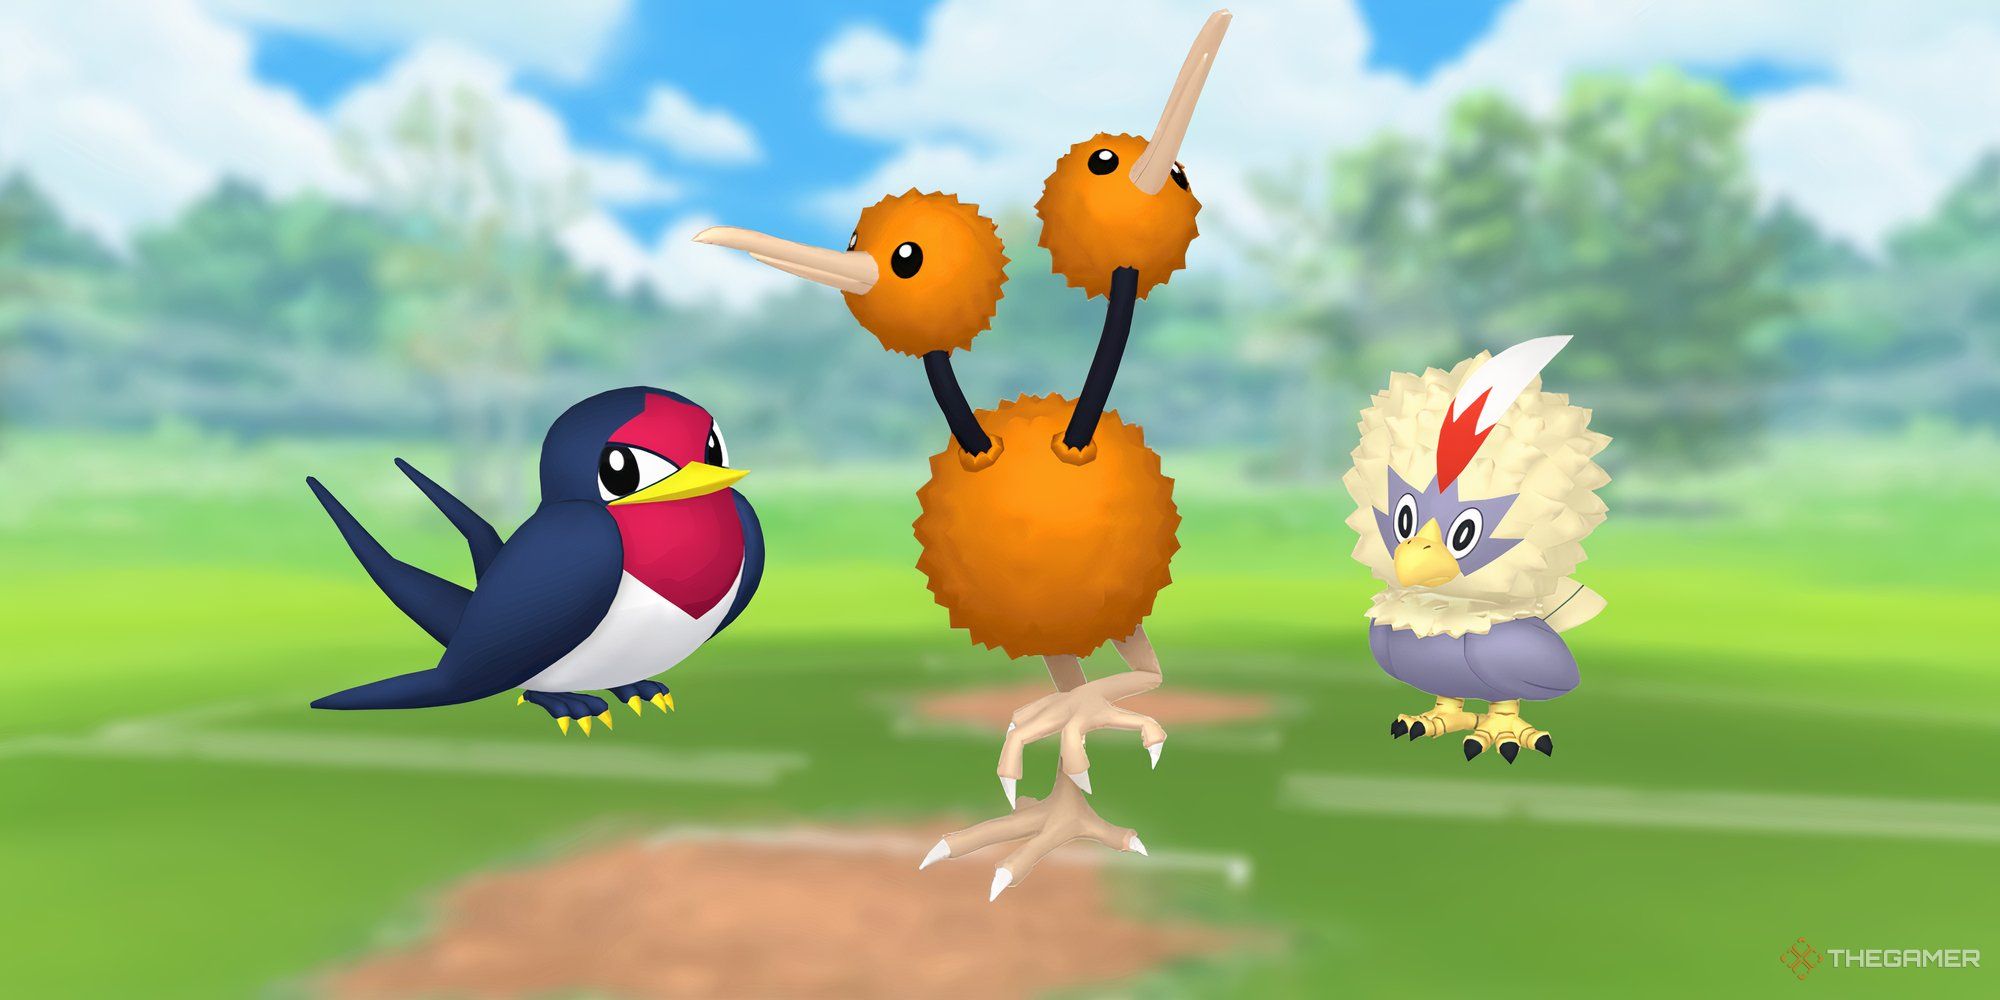 Image of Taillow, Doduo, and Rufflet with the Pokemon Go battlefield as the background